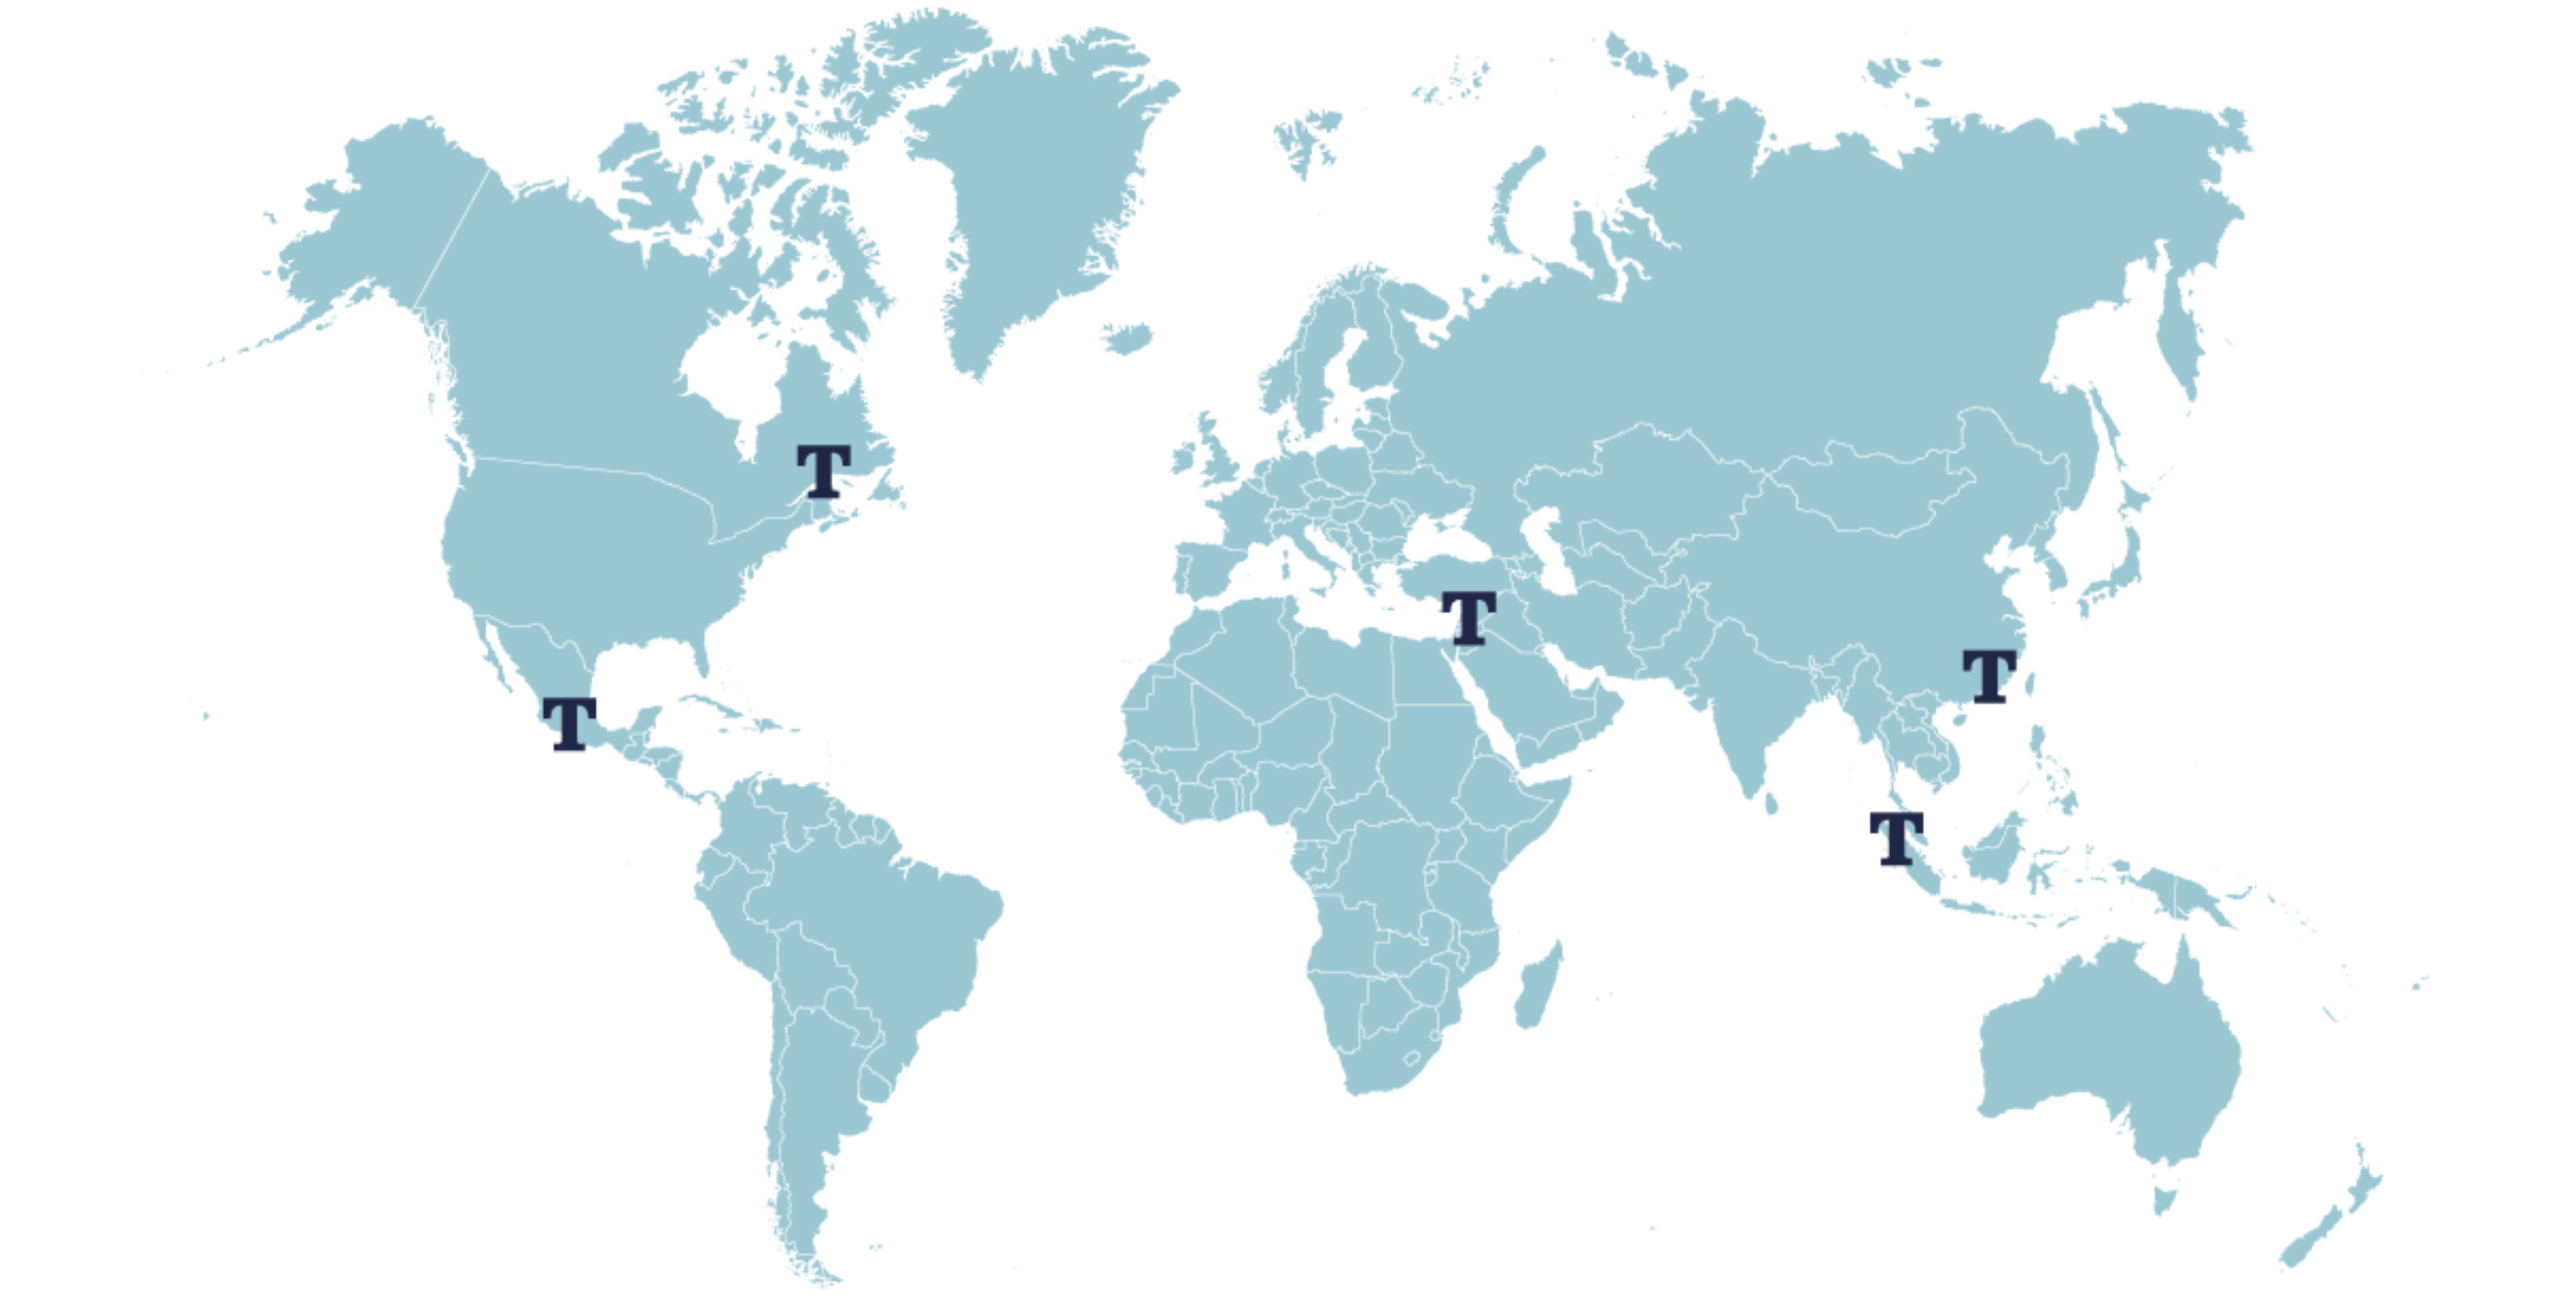 TIBO's international locations for its plastic injection molding